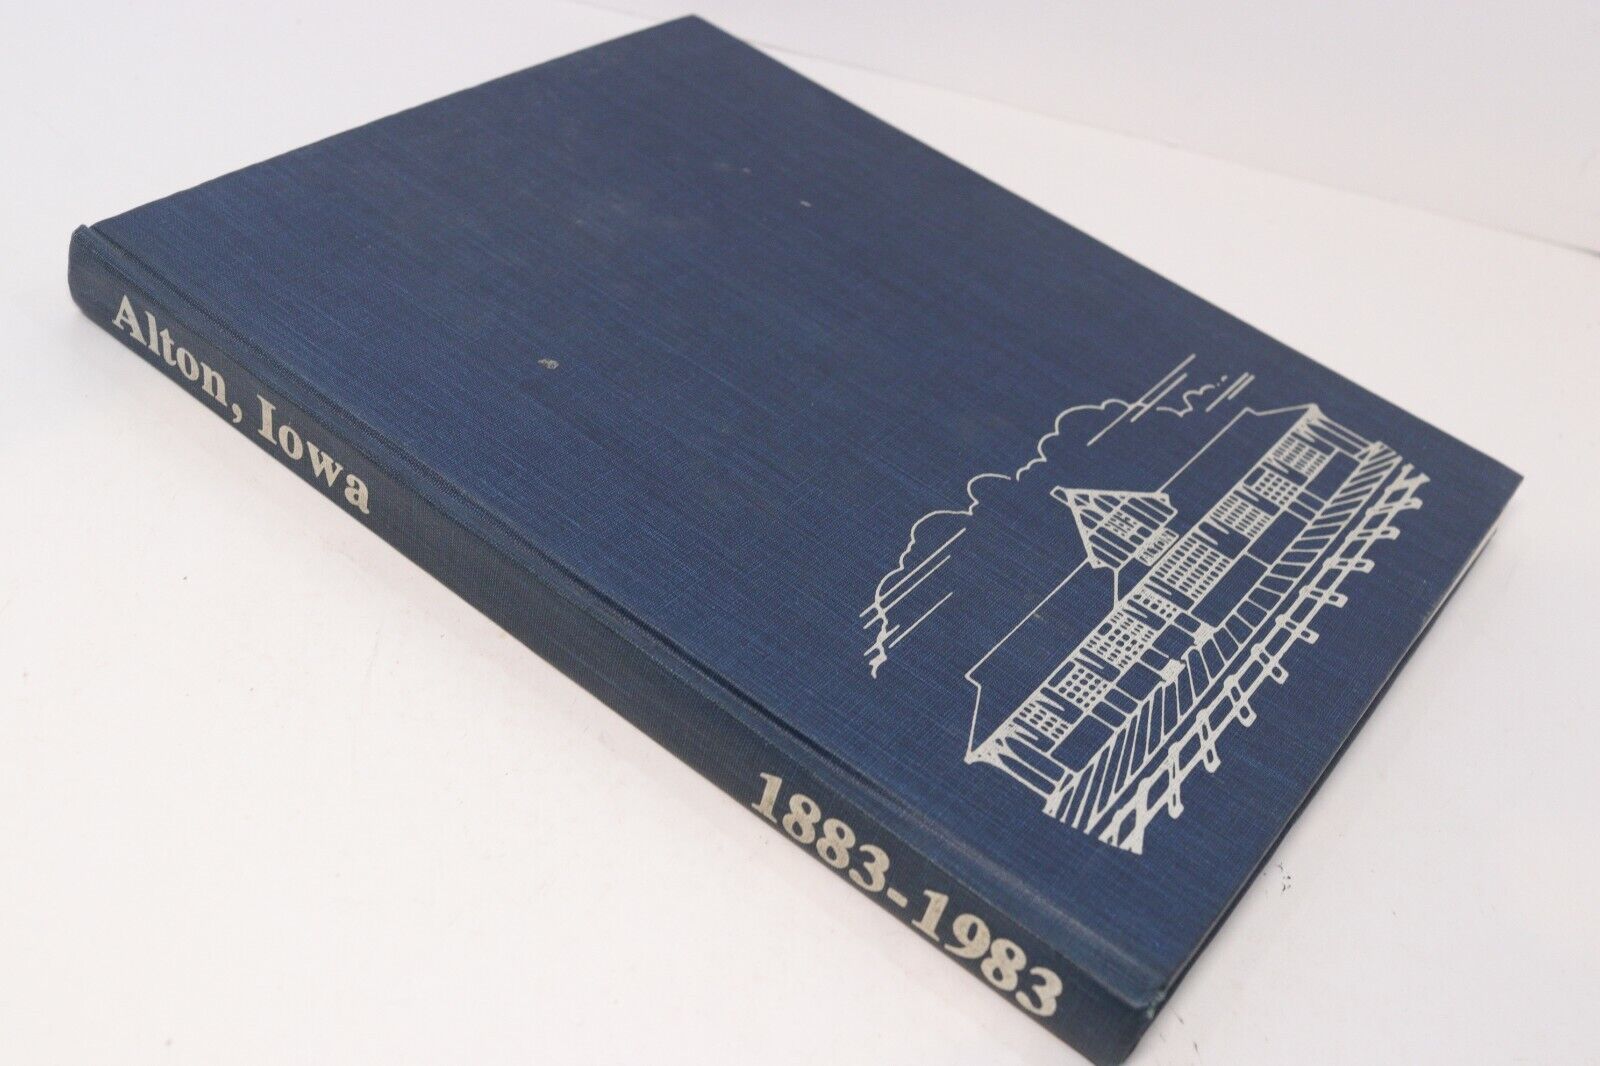 Alton Iowa 1883 1983 History Book Information Early Family Reference Local Town